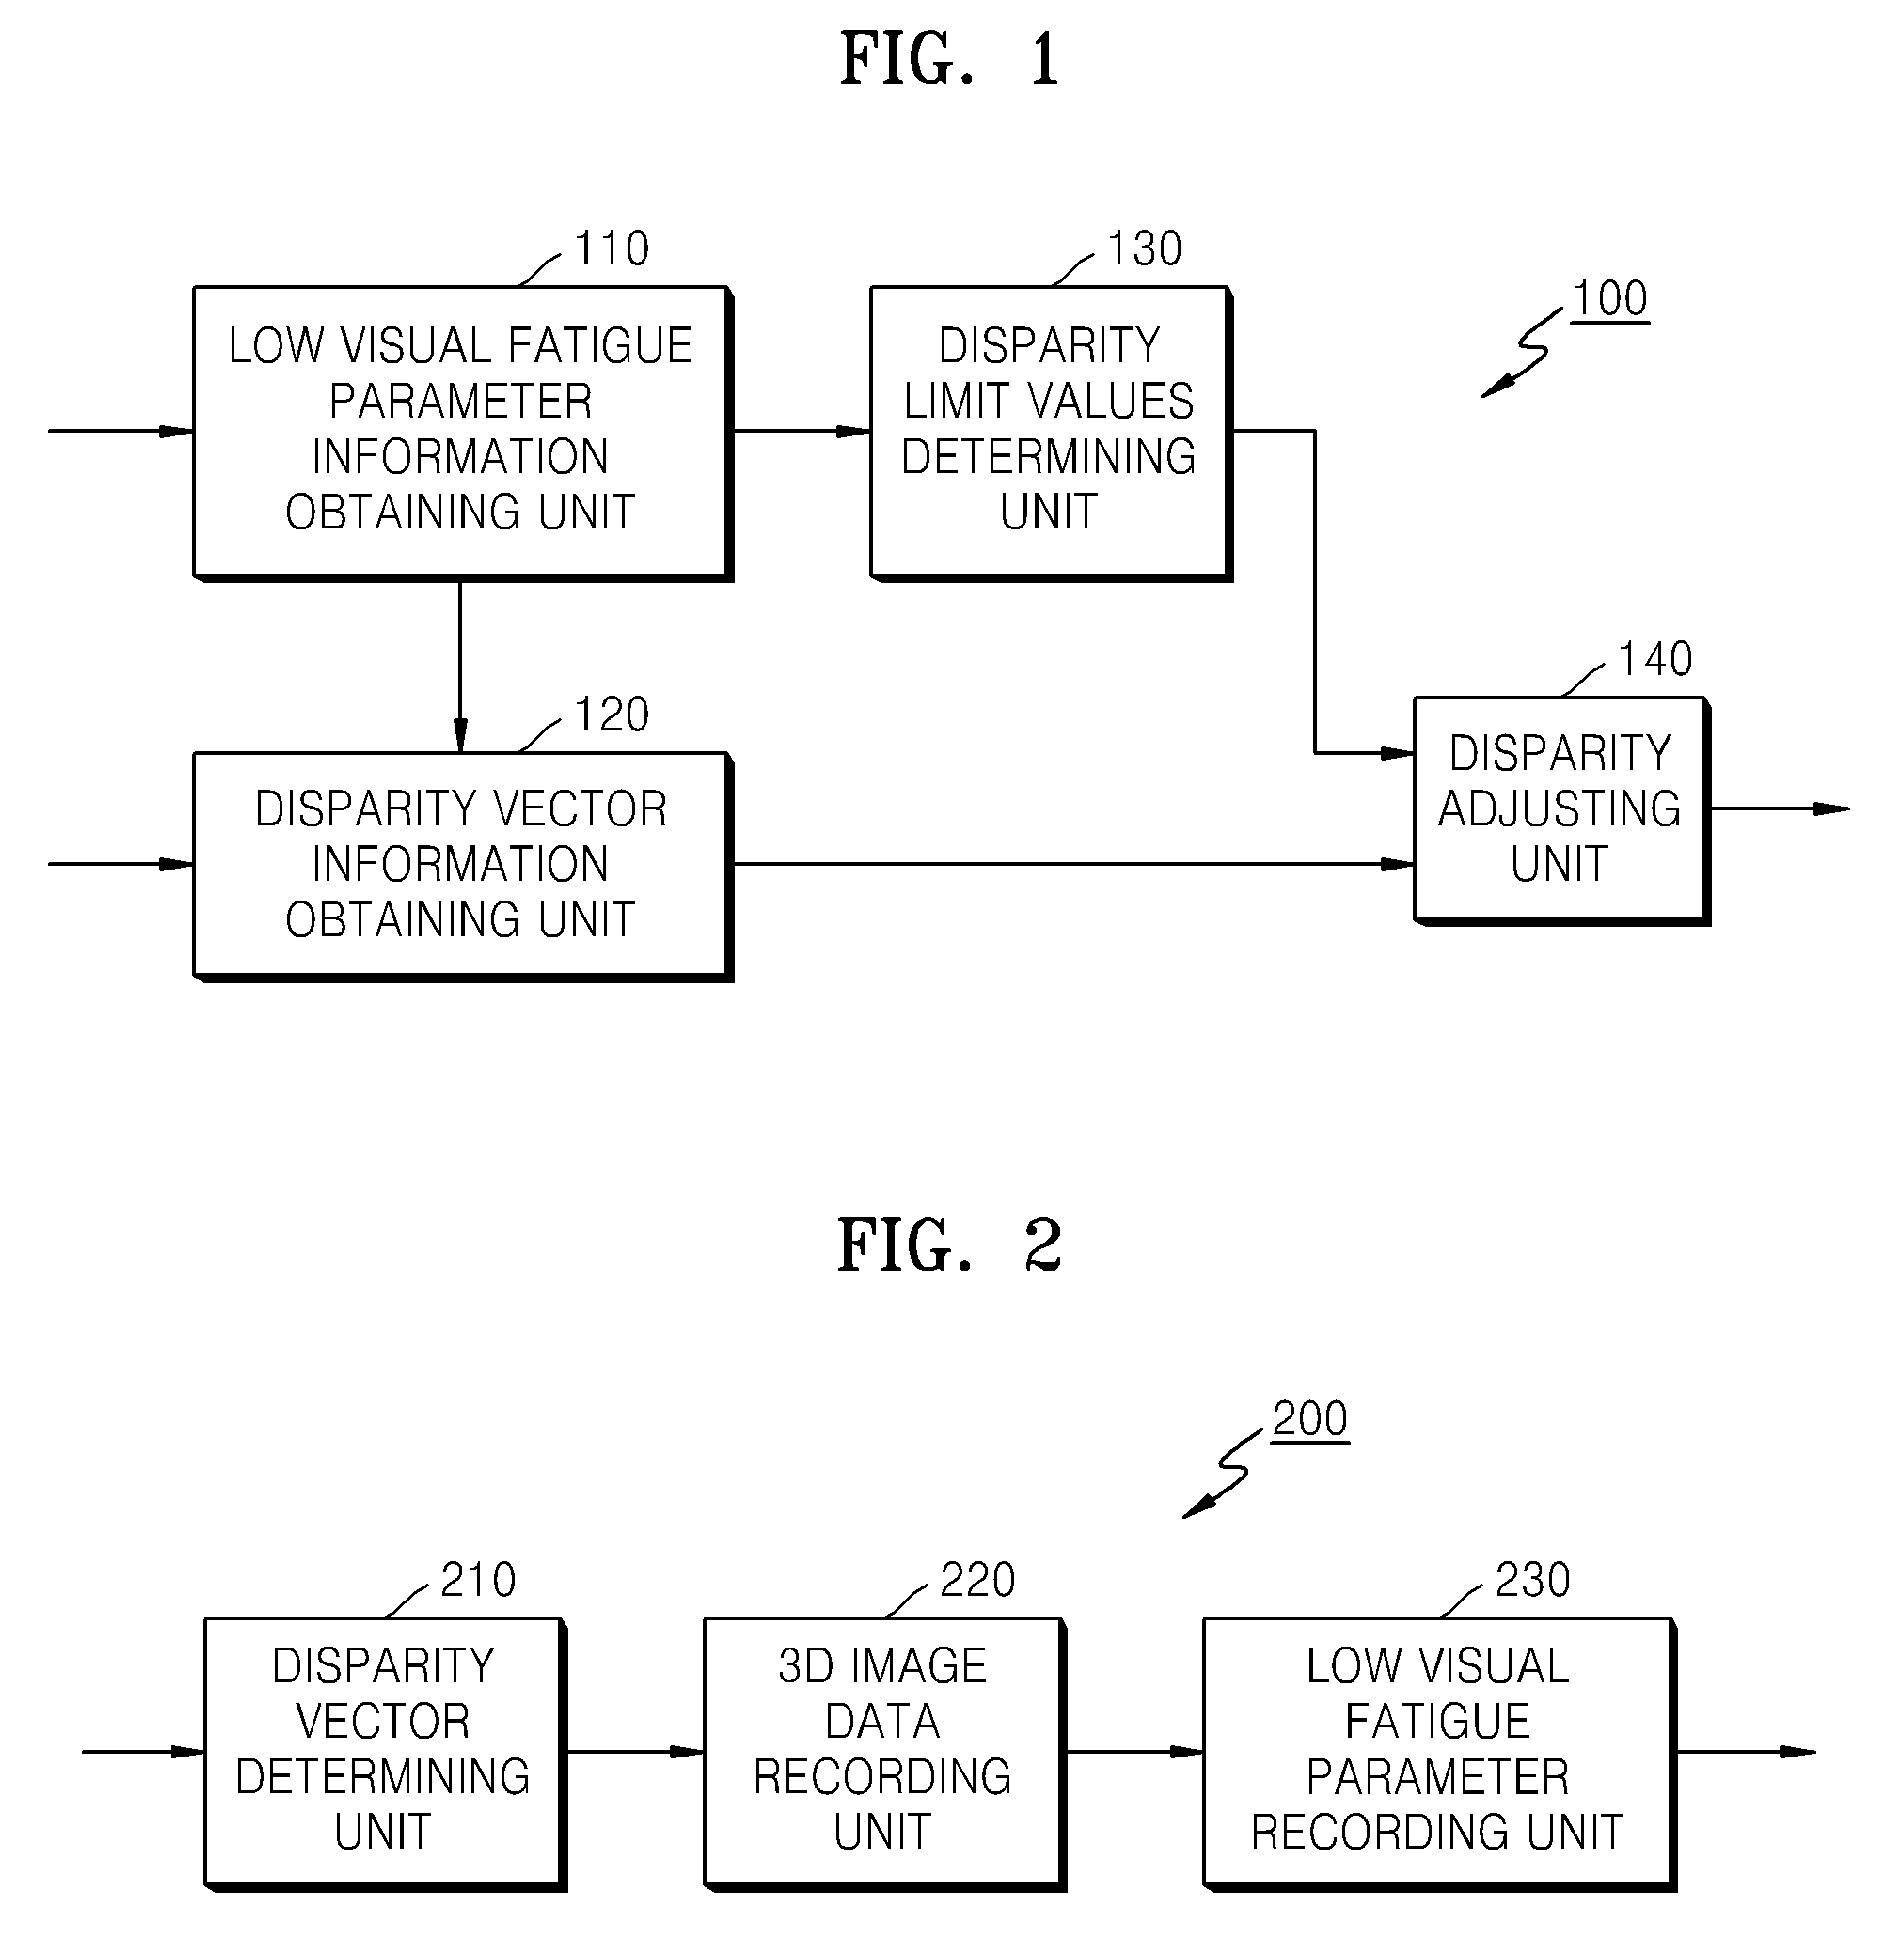 Method and apparatus for reducing fatigue resulting from viewing three-dimensional image display, and method and apparatus for generating data stream of low visual fatigue three-dimensional image